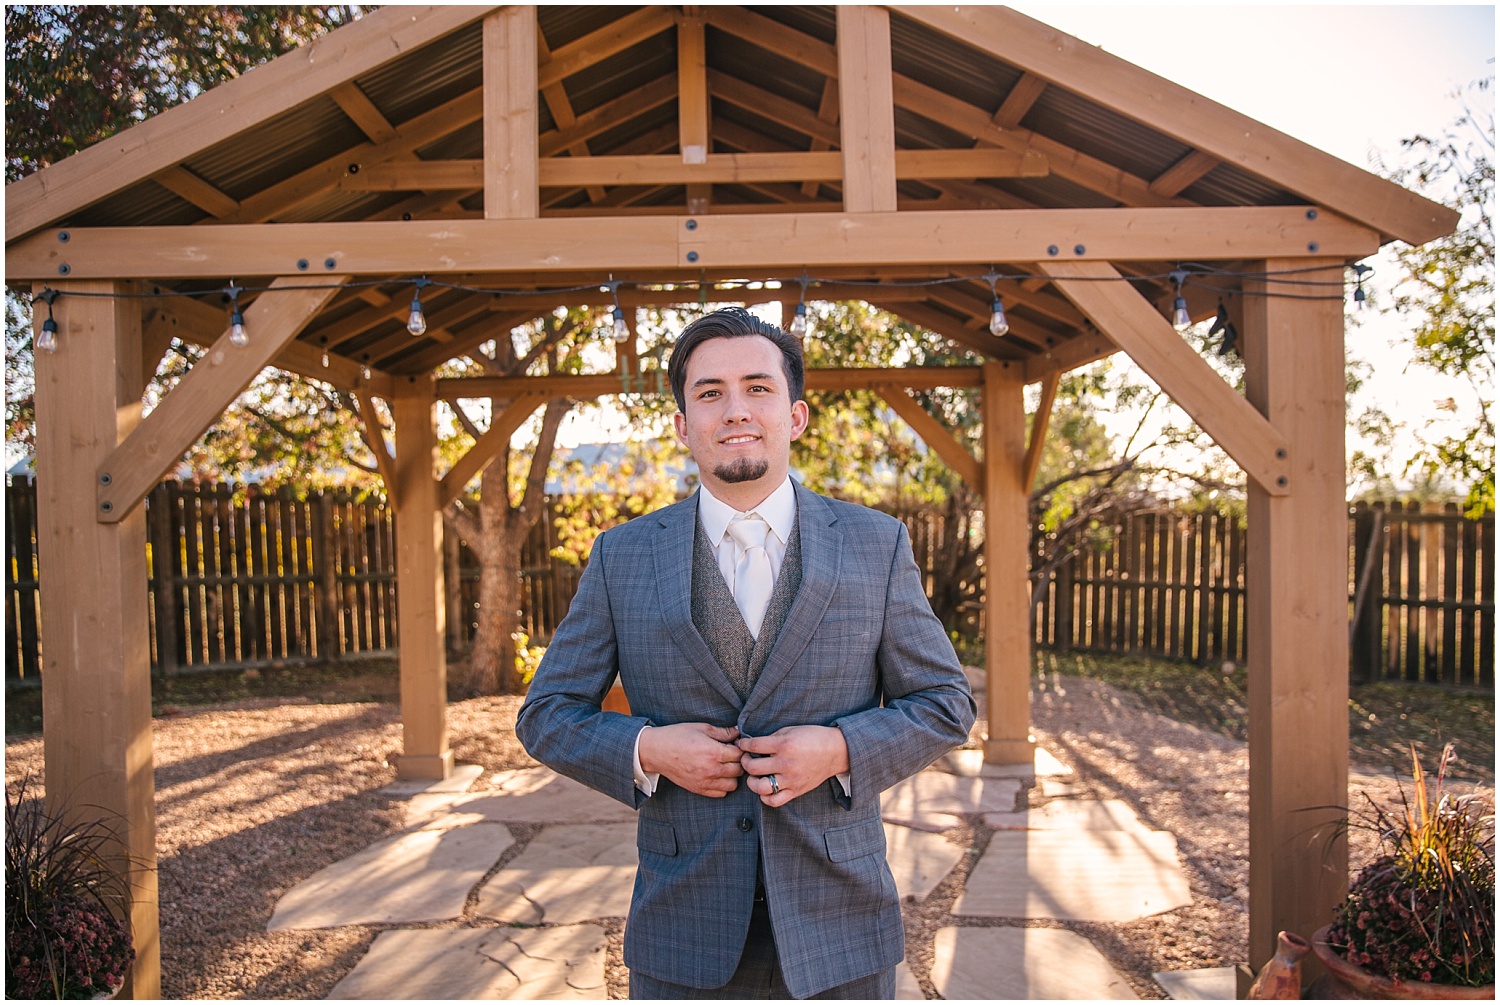 Formal groom's portraits in Albuquerque New Mexico | Suit rental by Ann Matthews